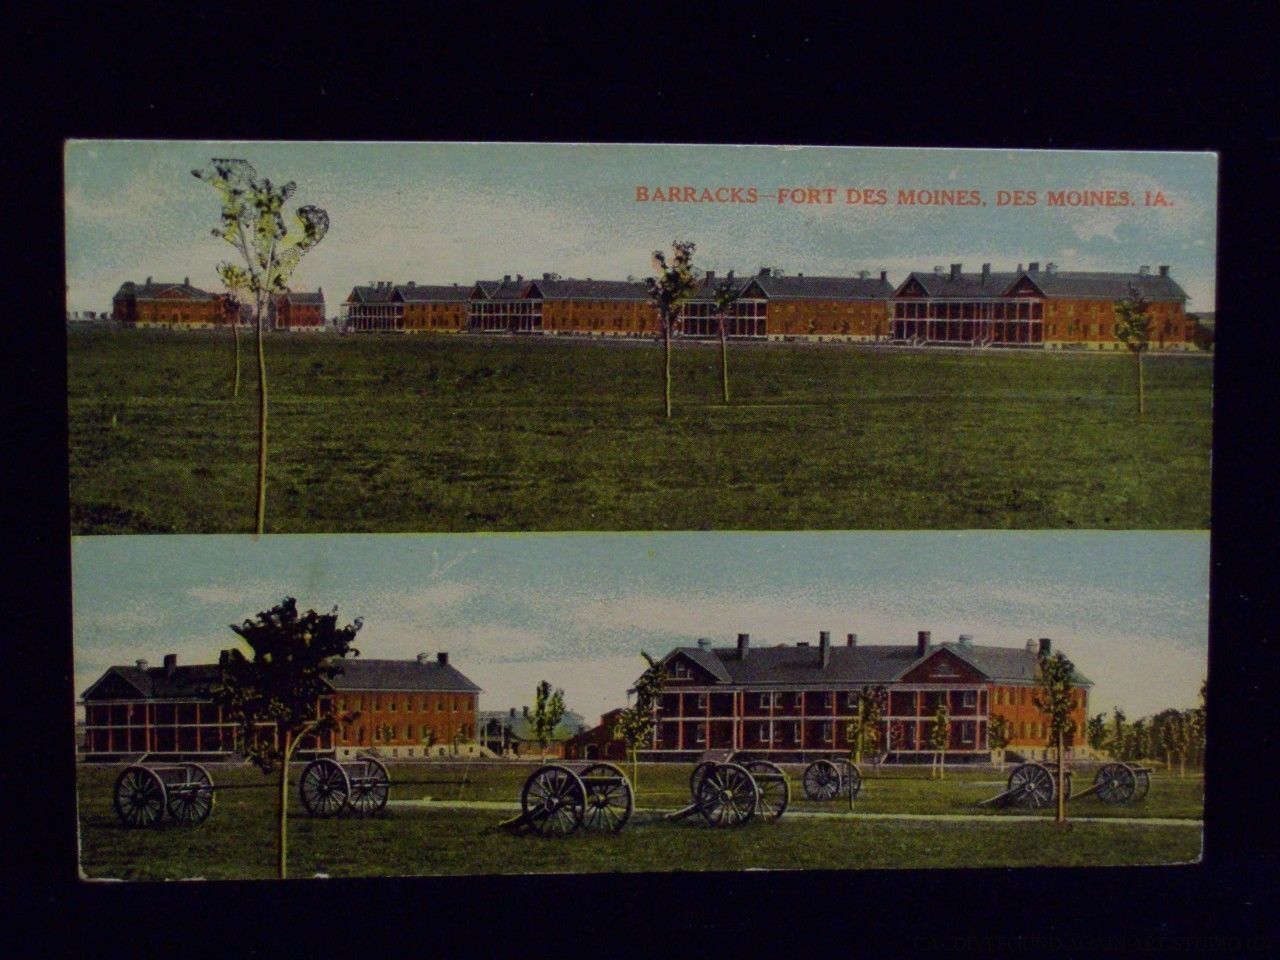 Army Barracks Fort Des Moines Iowa Old Postcard Soldiers Cannon Vintage View